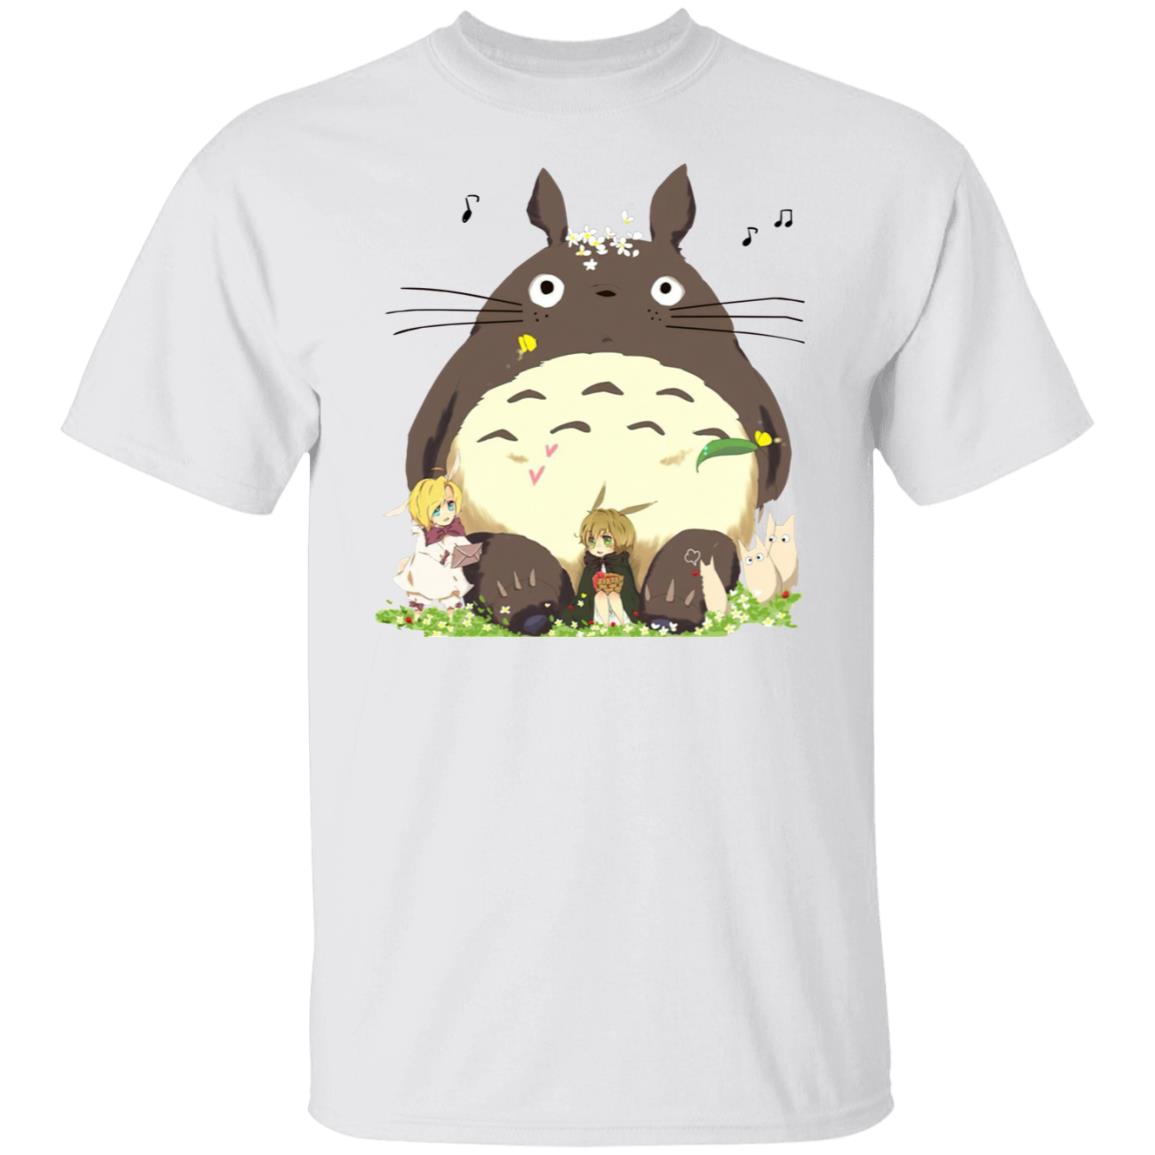 Totoro and the Elves T shirt